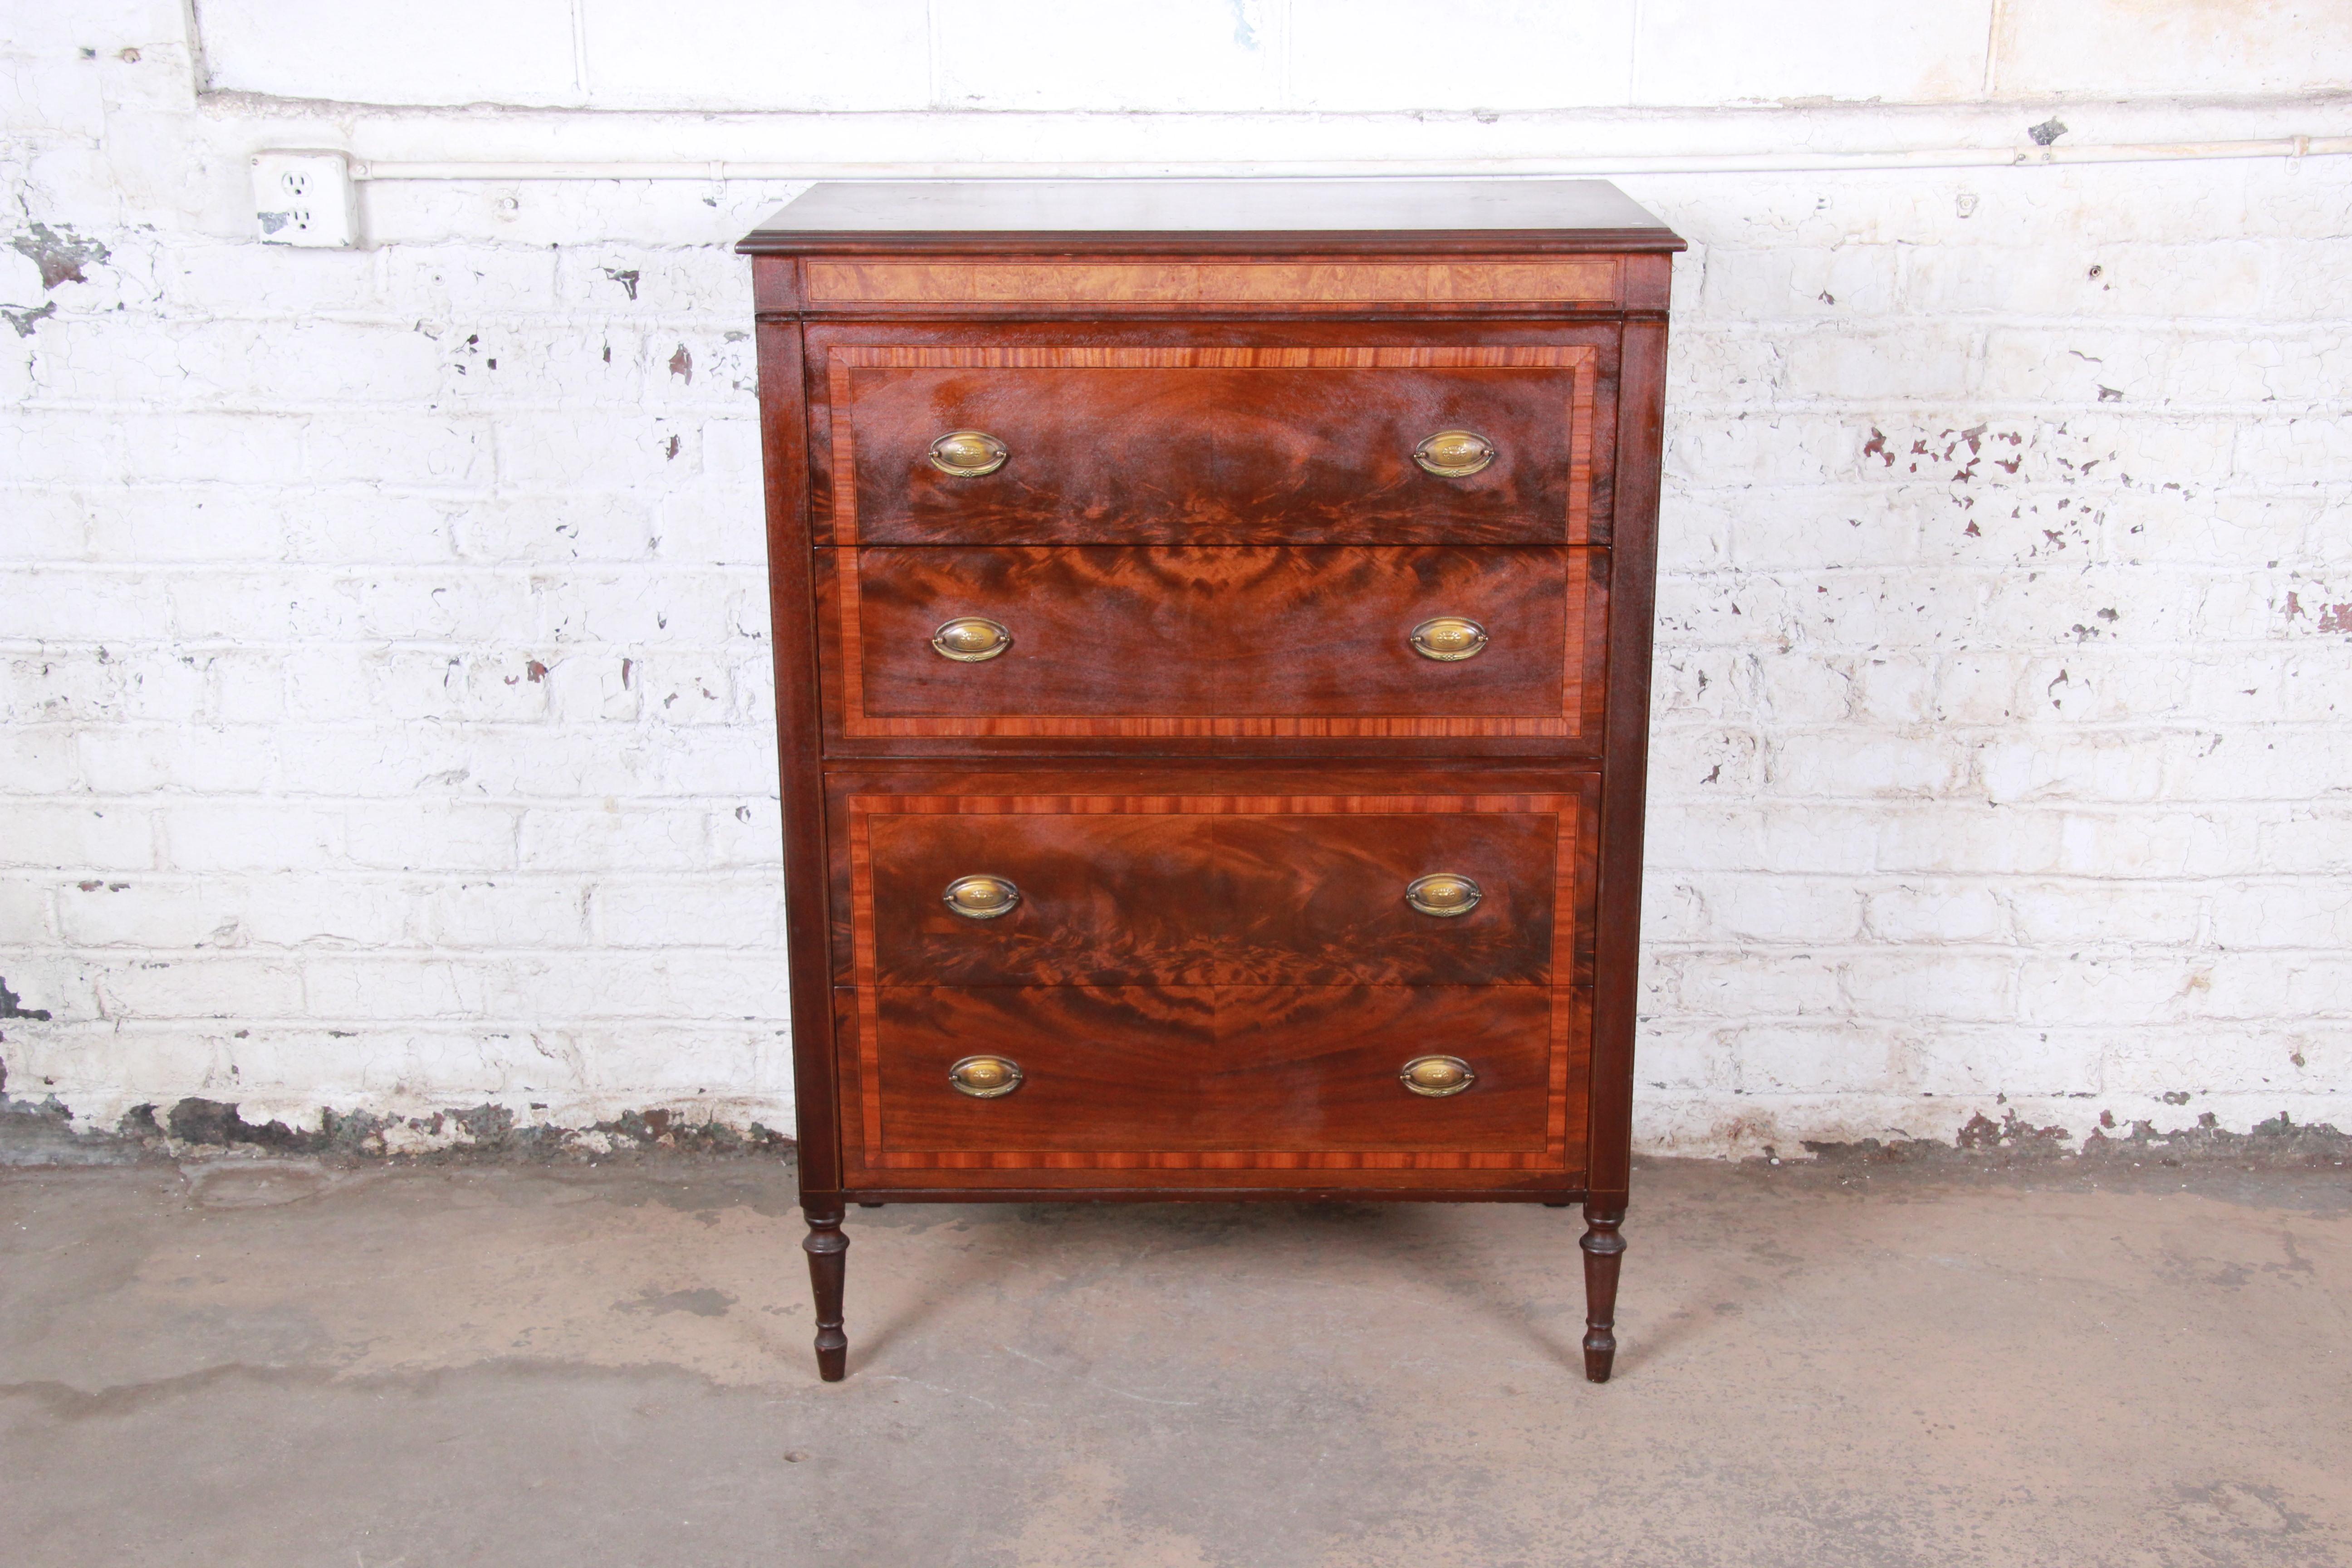 A beautiful and rare early John Widdicomb highboy dresser, circa 1920s. The dresser features gorgeous flame mahogany wood grain with burl wood accents. It offers ample storage, with four deep dovetailed drawers. Brass hardware is original, and the